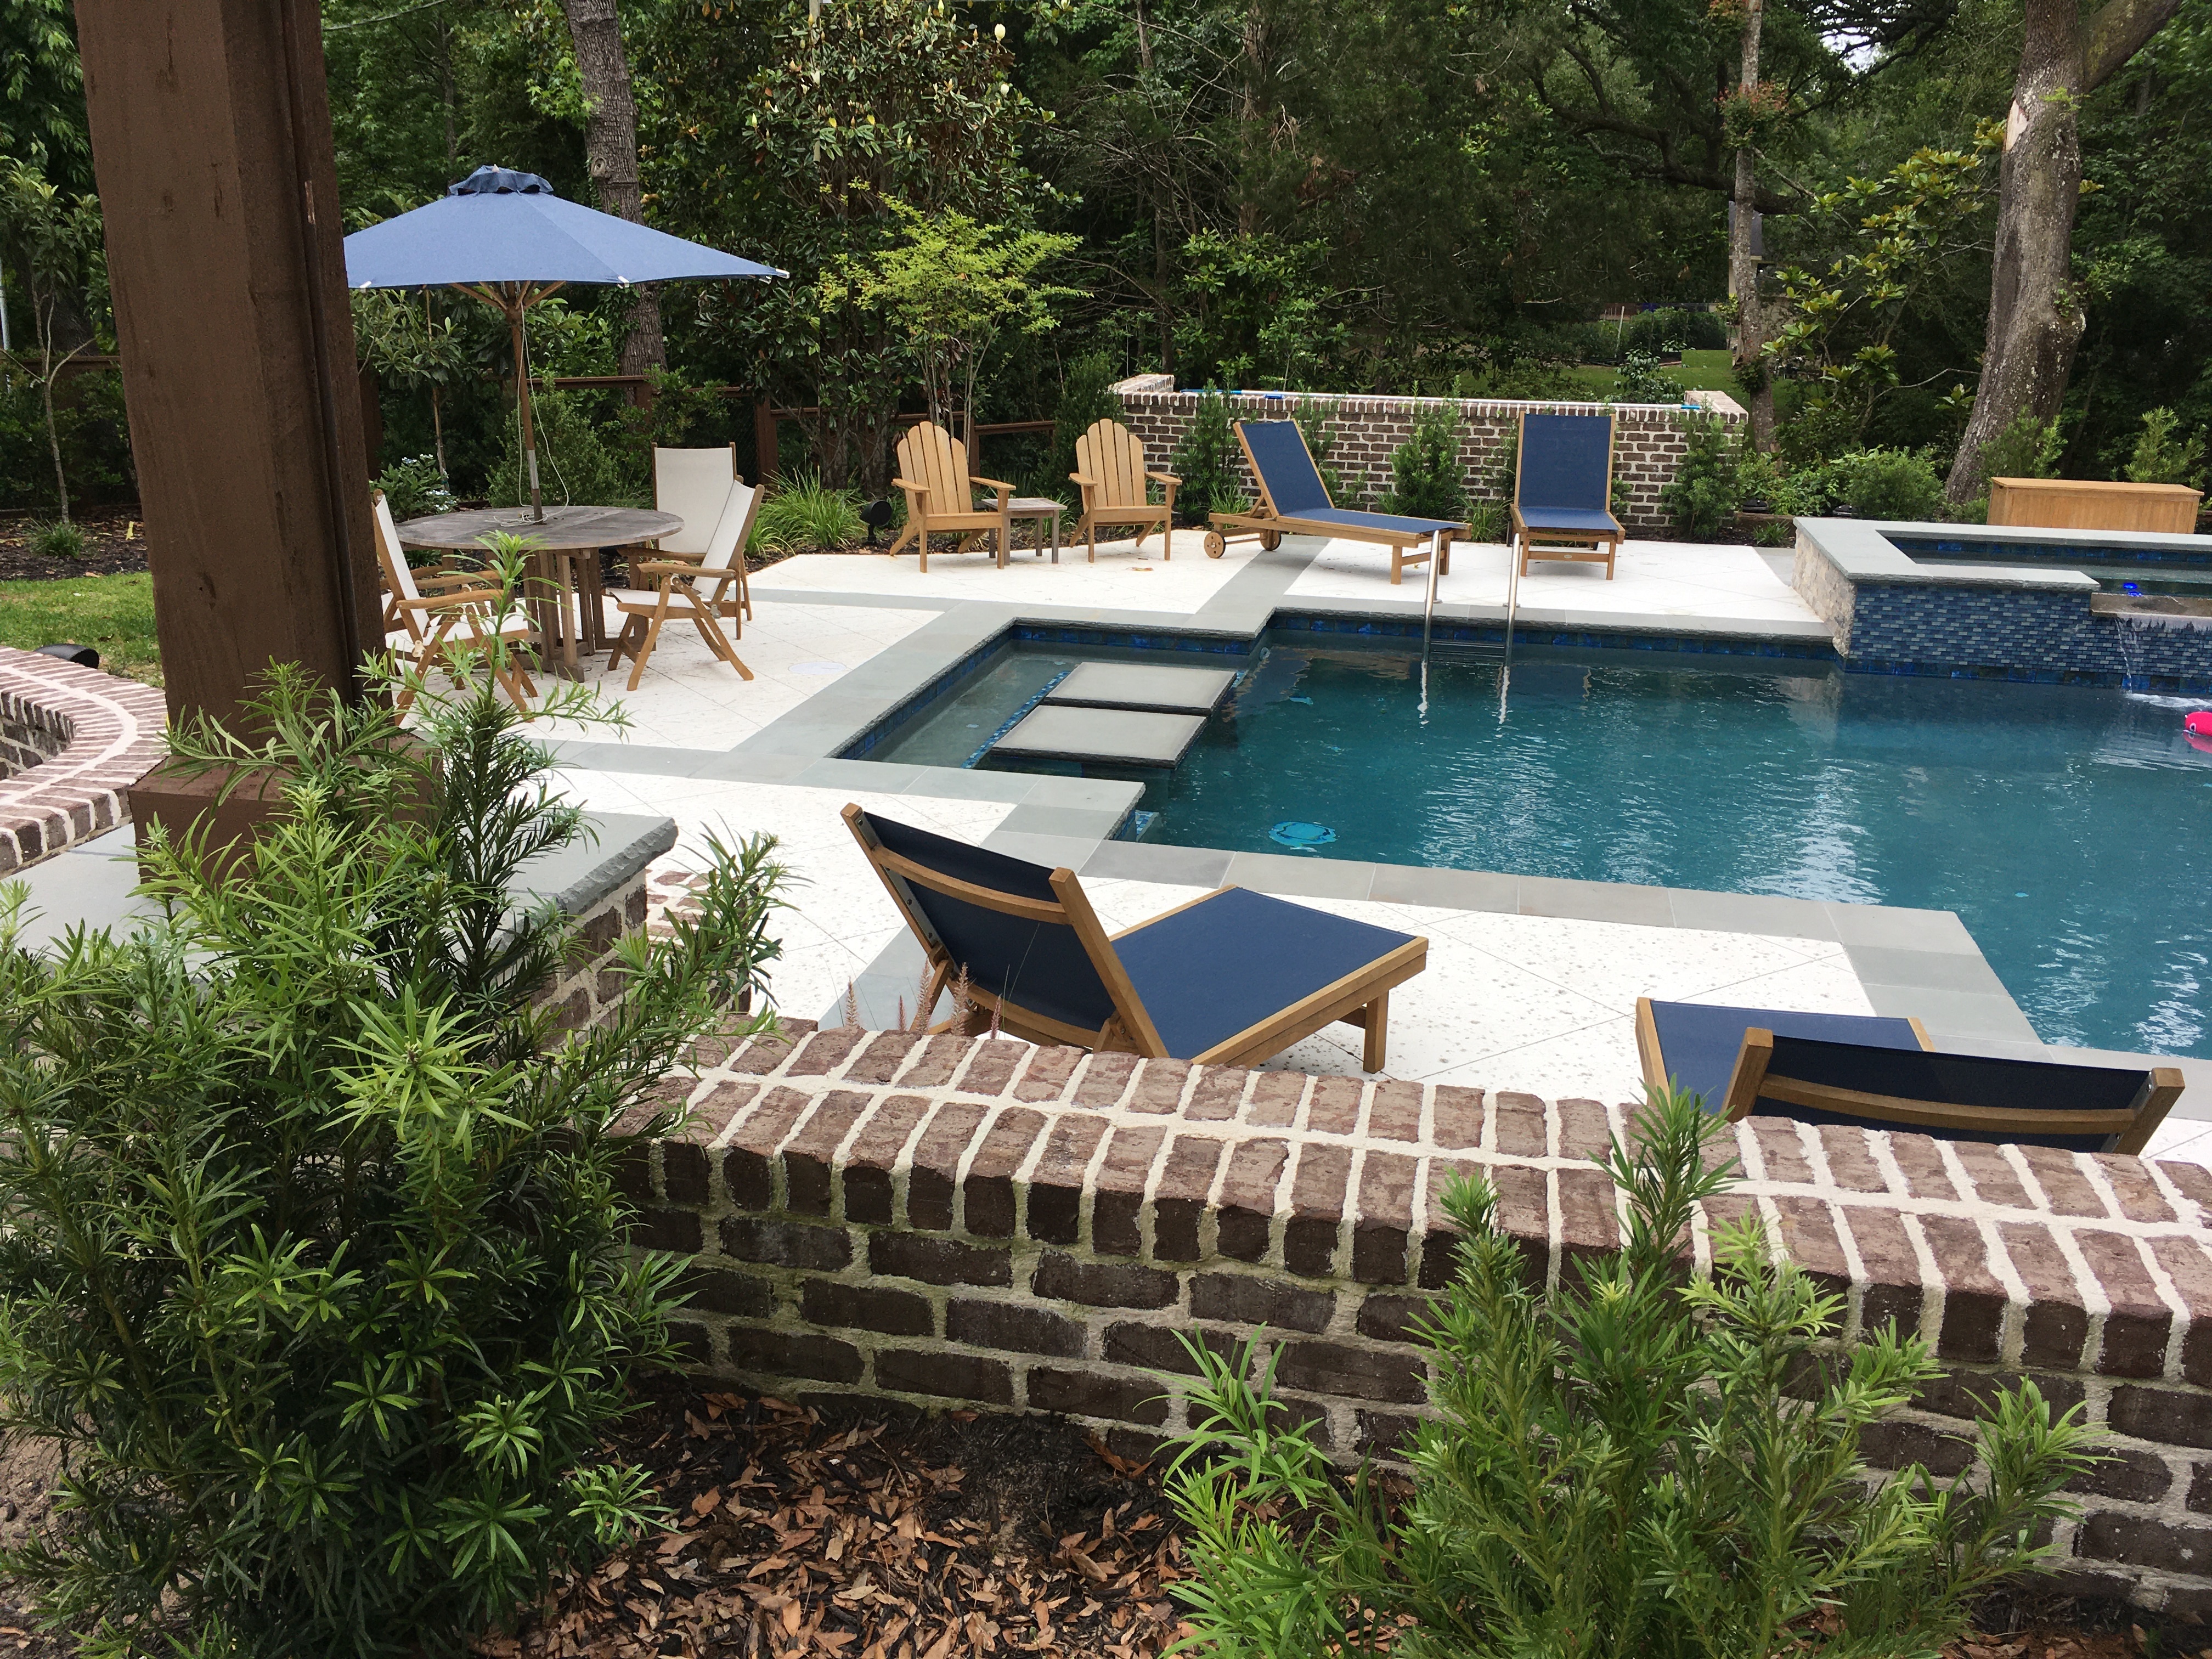 Home Page Slider – Wooded Pool